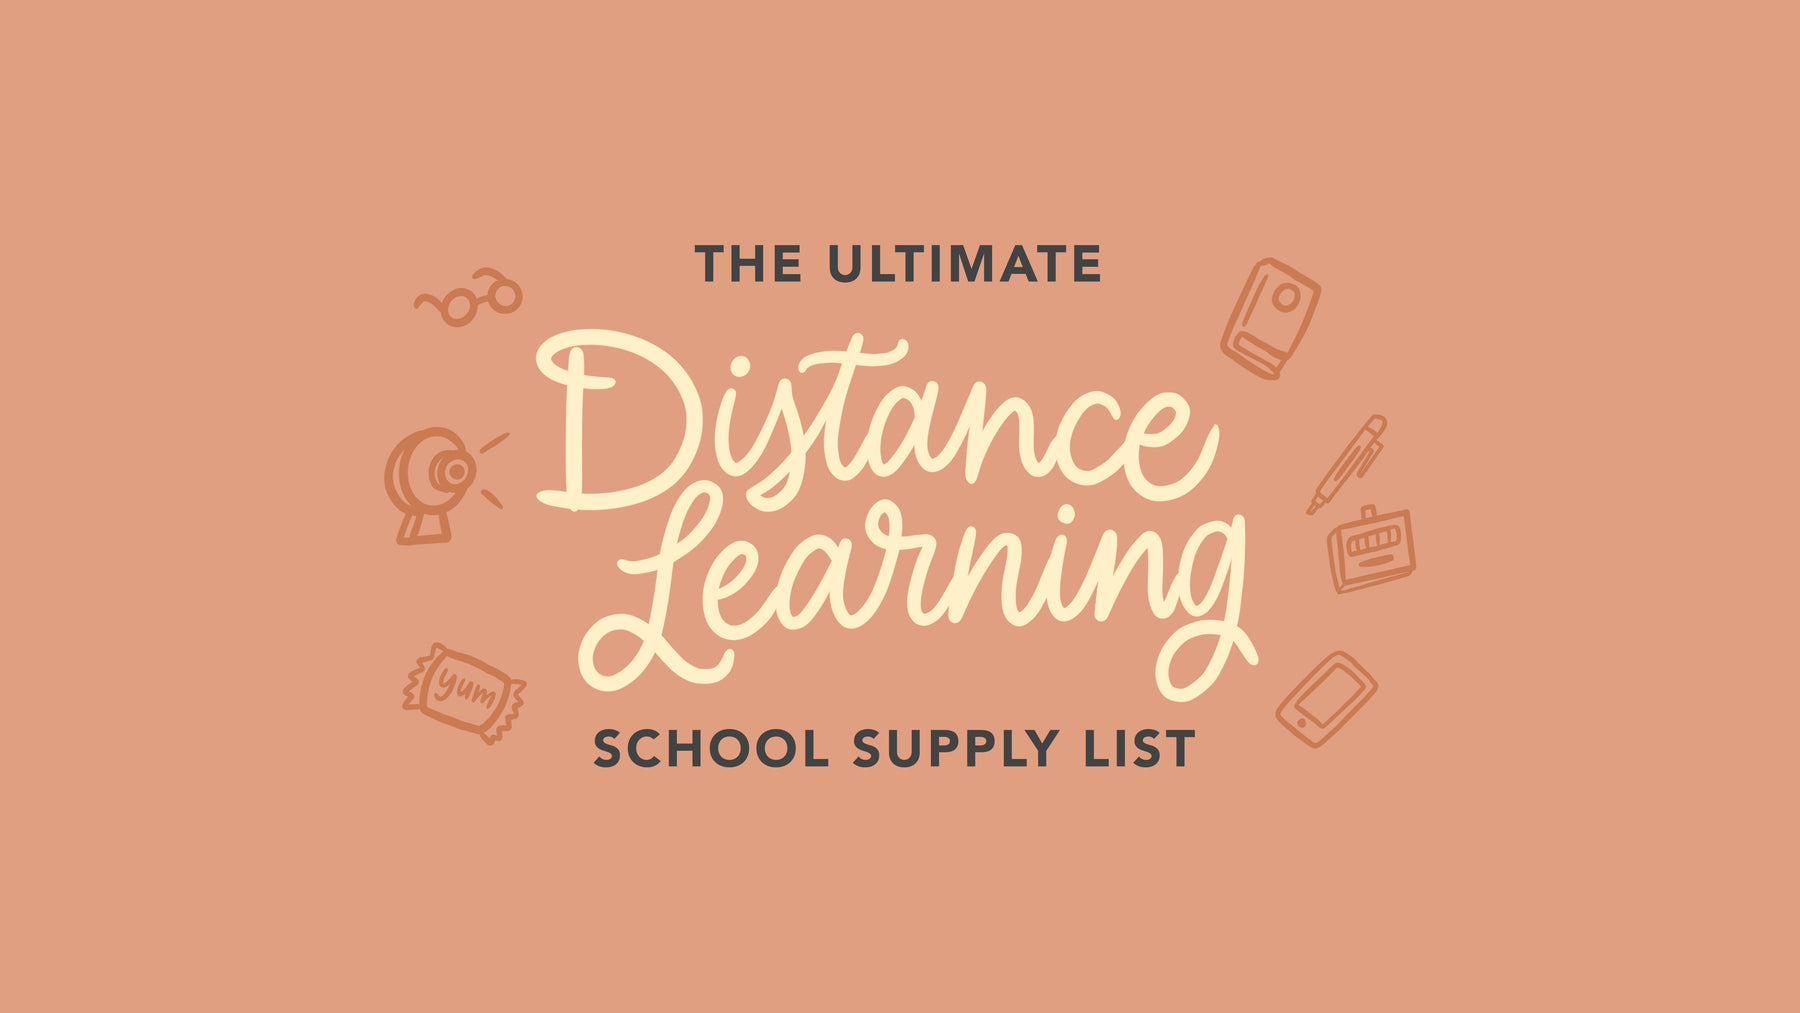 The Ultimate School Supplies List for Distance Learning You Didn’t Know You Needed in 2020